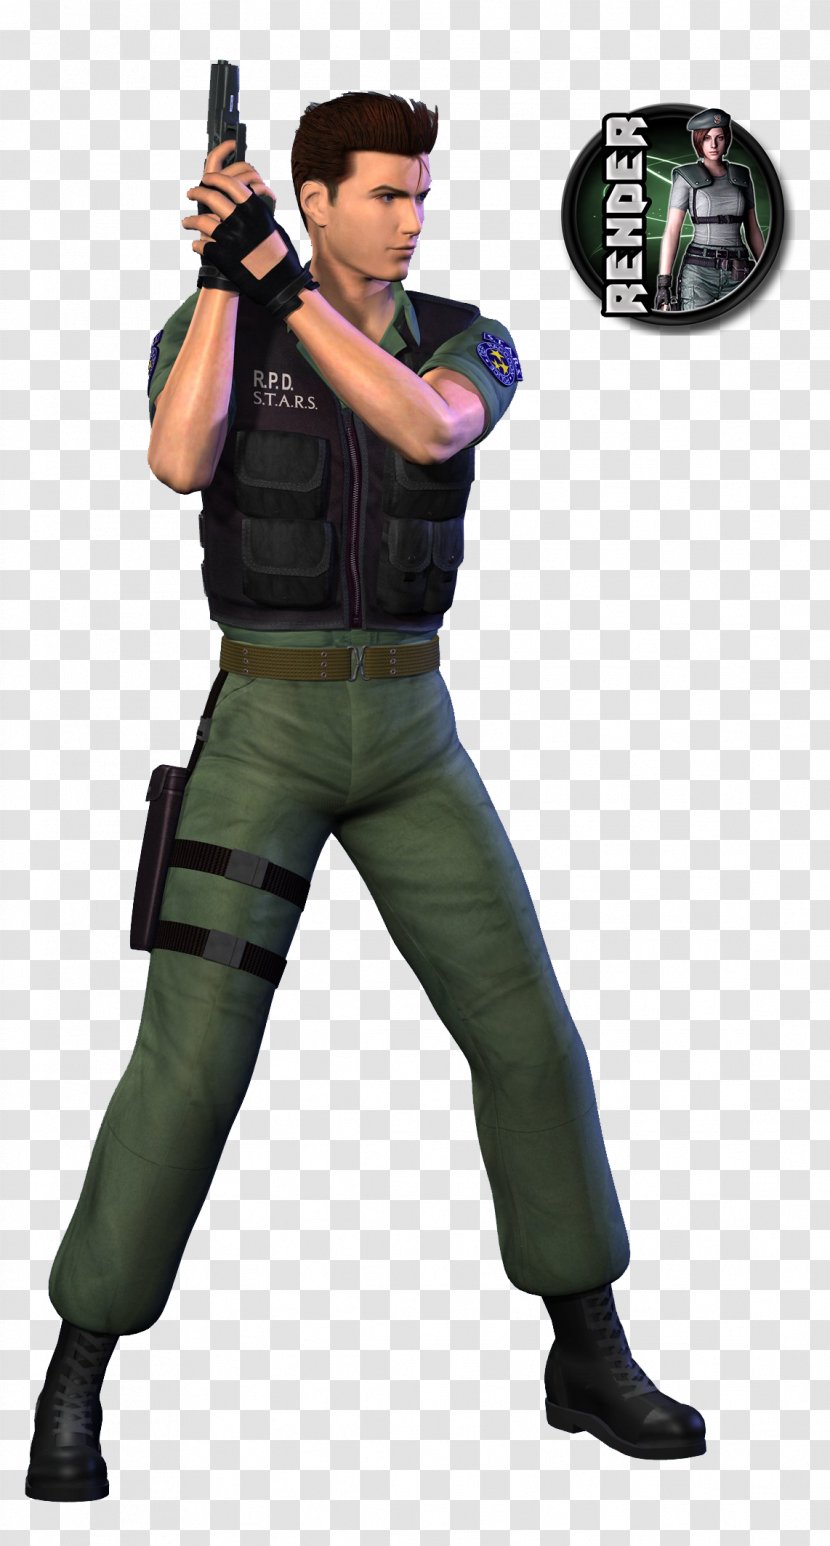 Chris Redfield Resident Evil – Code: Veronica Evil: The Darkside Chronicles 7: Biohazard - Soldier Transparent PNG